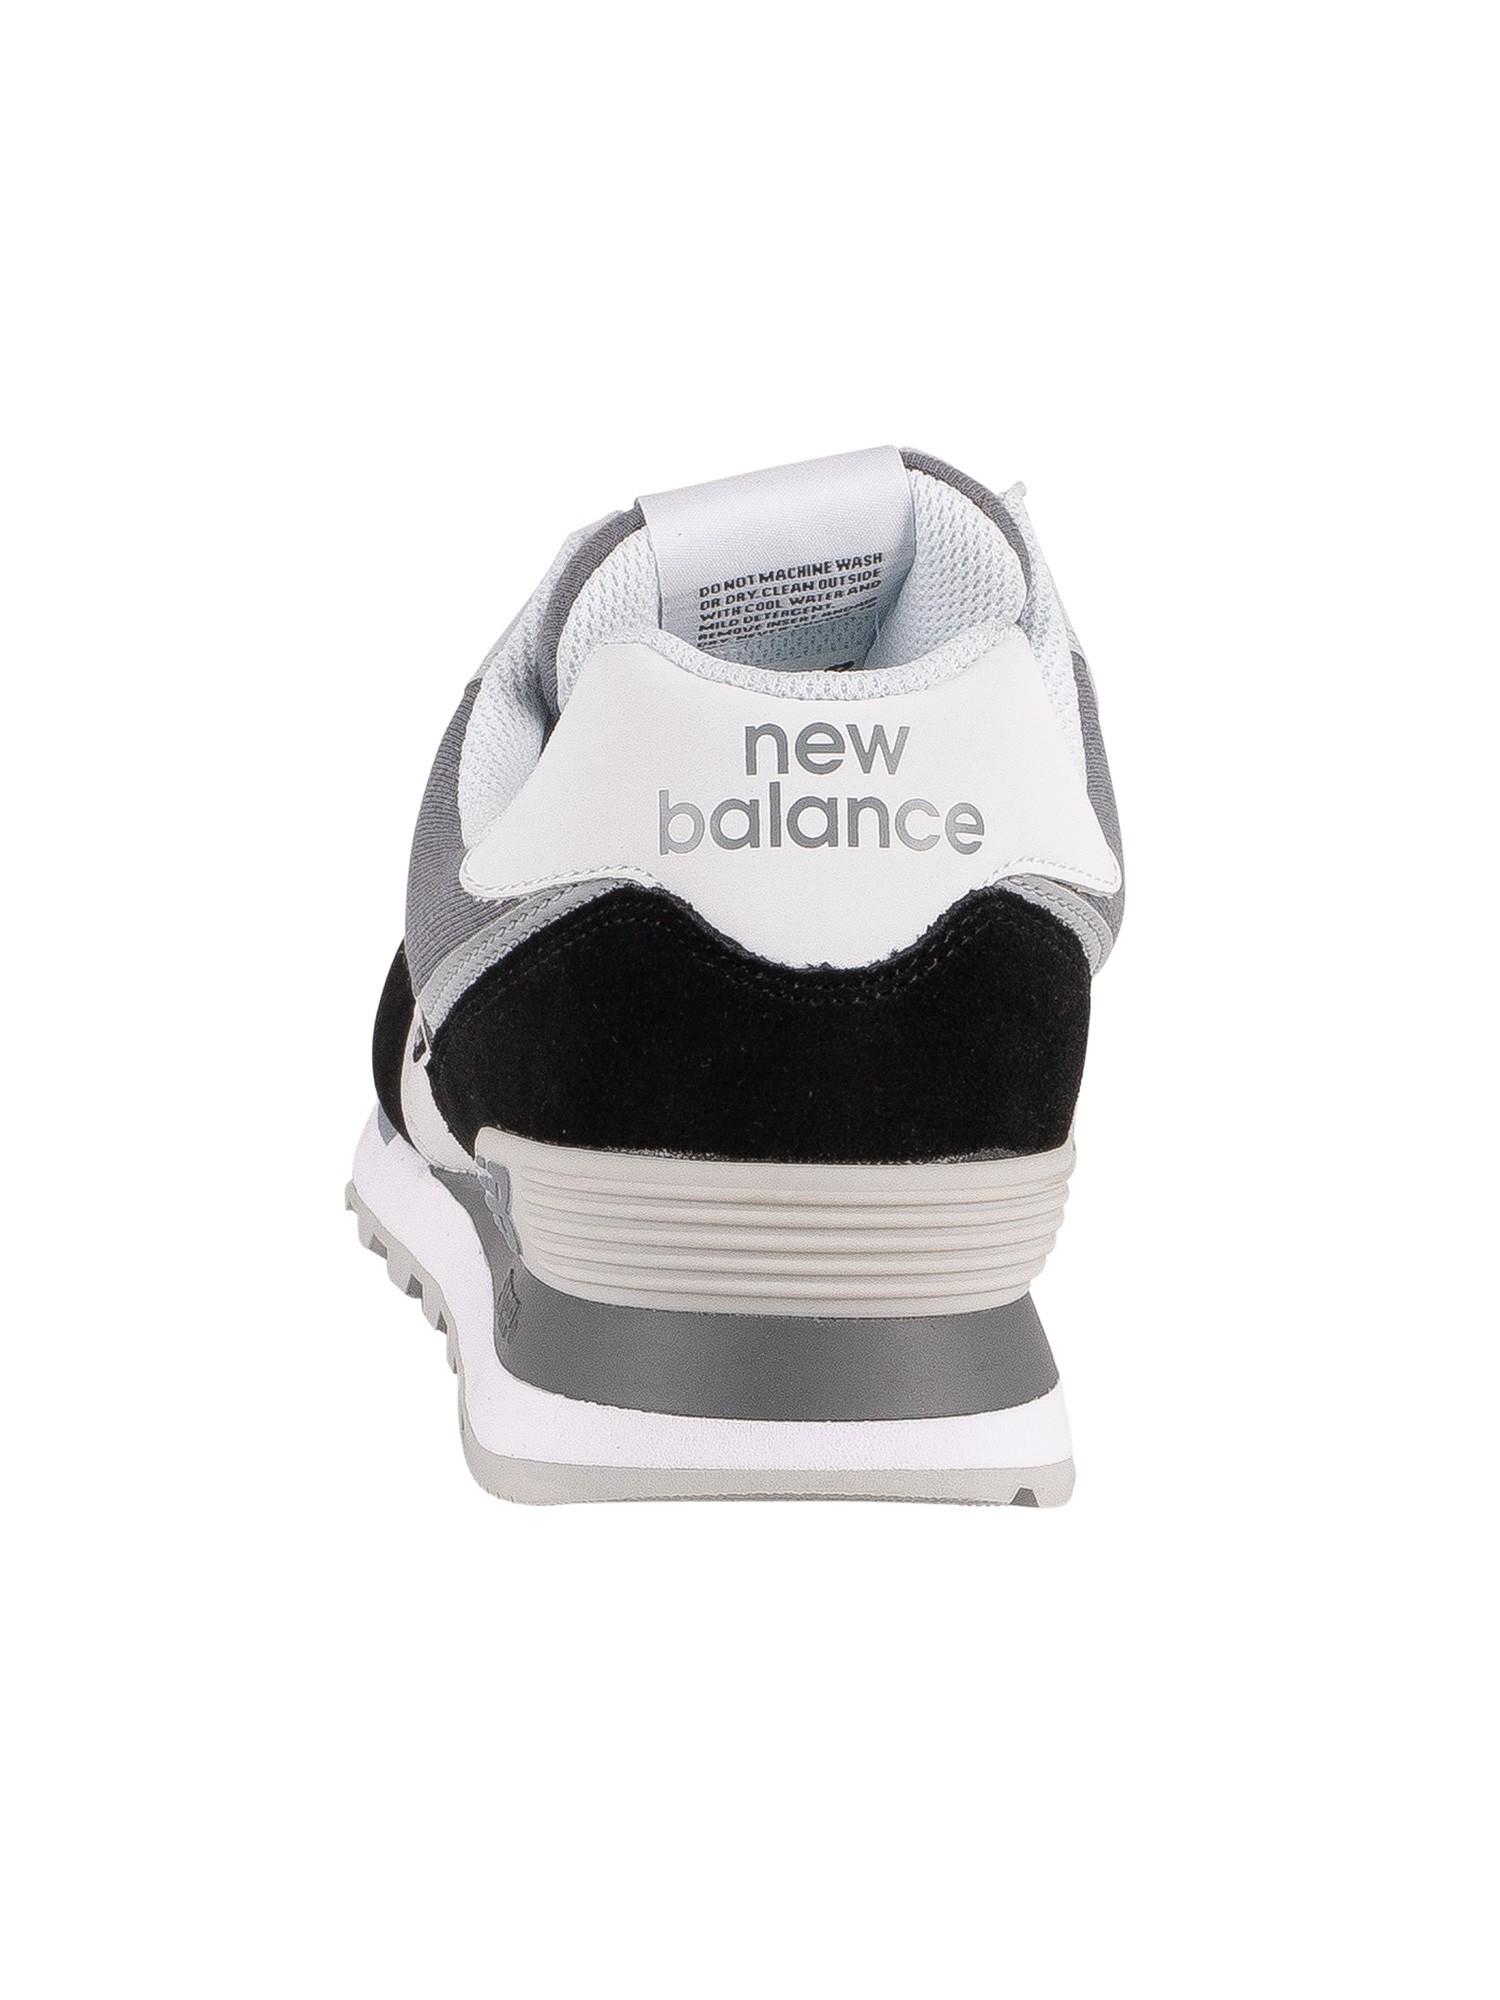 New Balance 574 Sky Lite Suede Trainers in Black/White (Black) for 